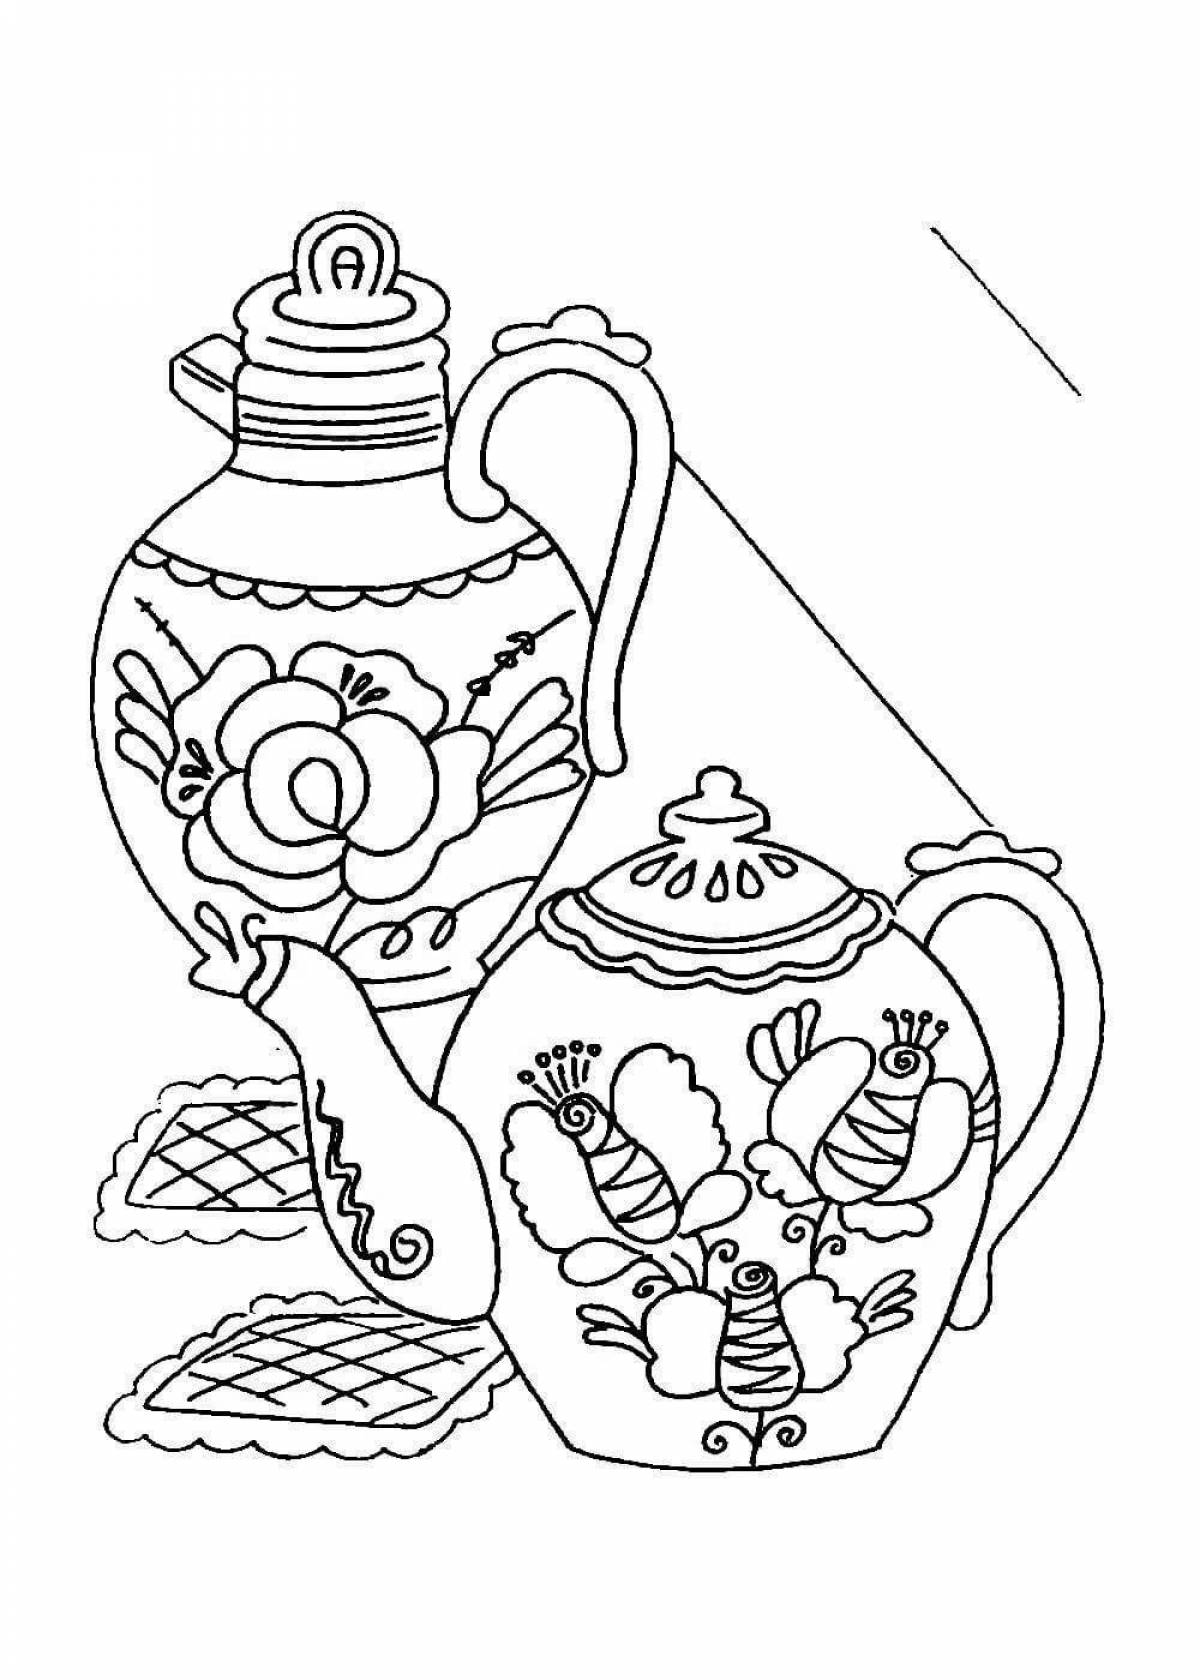 Coloring page tempting Gzhel dishes